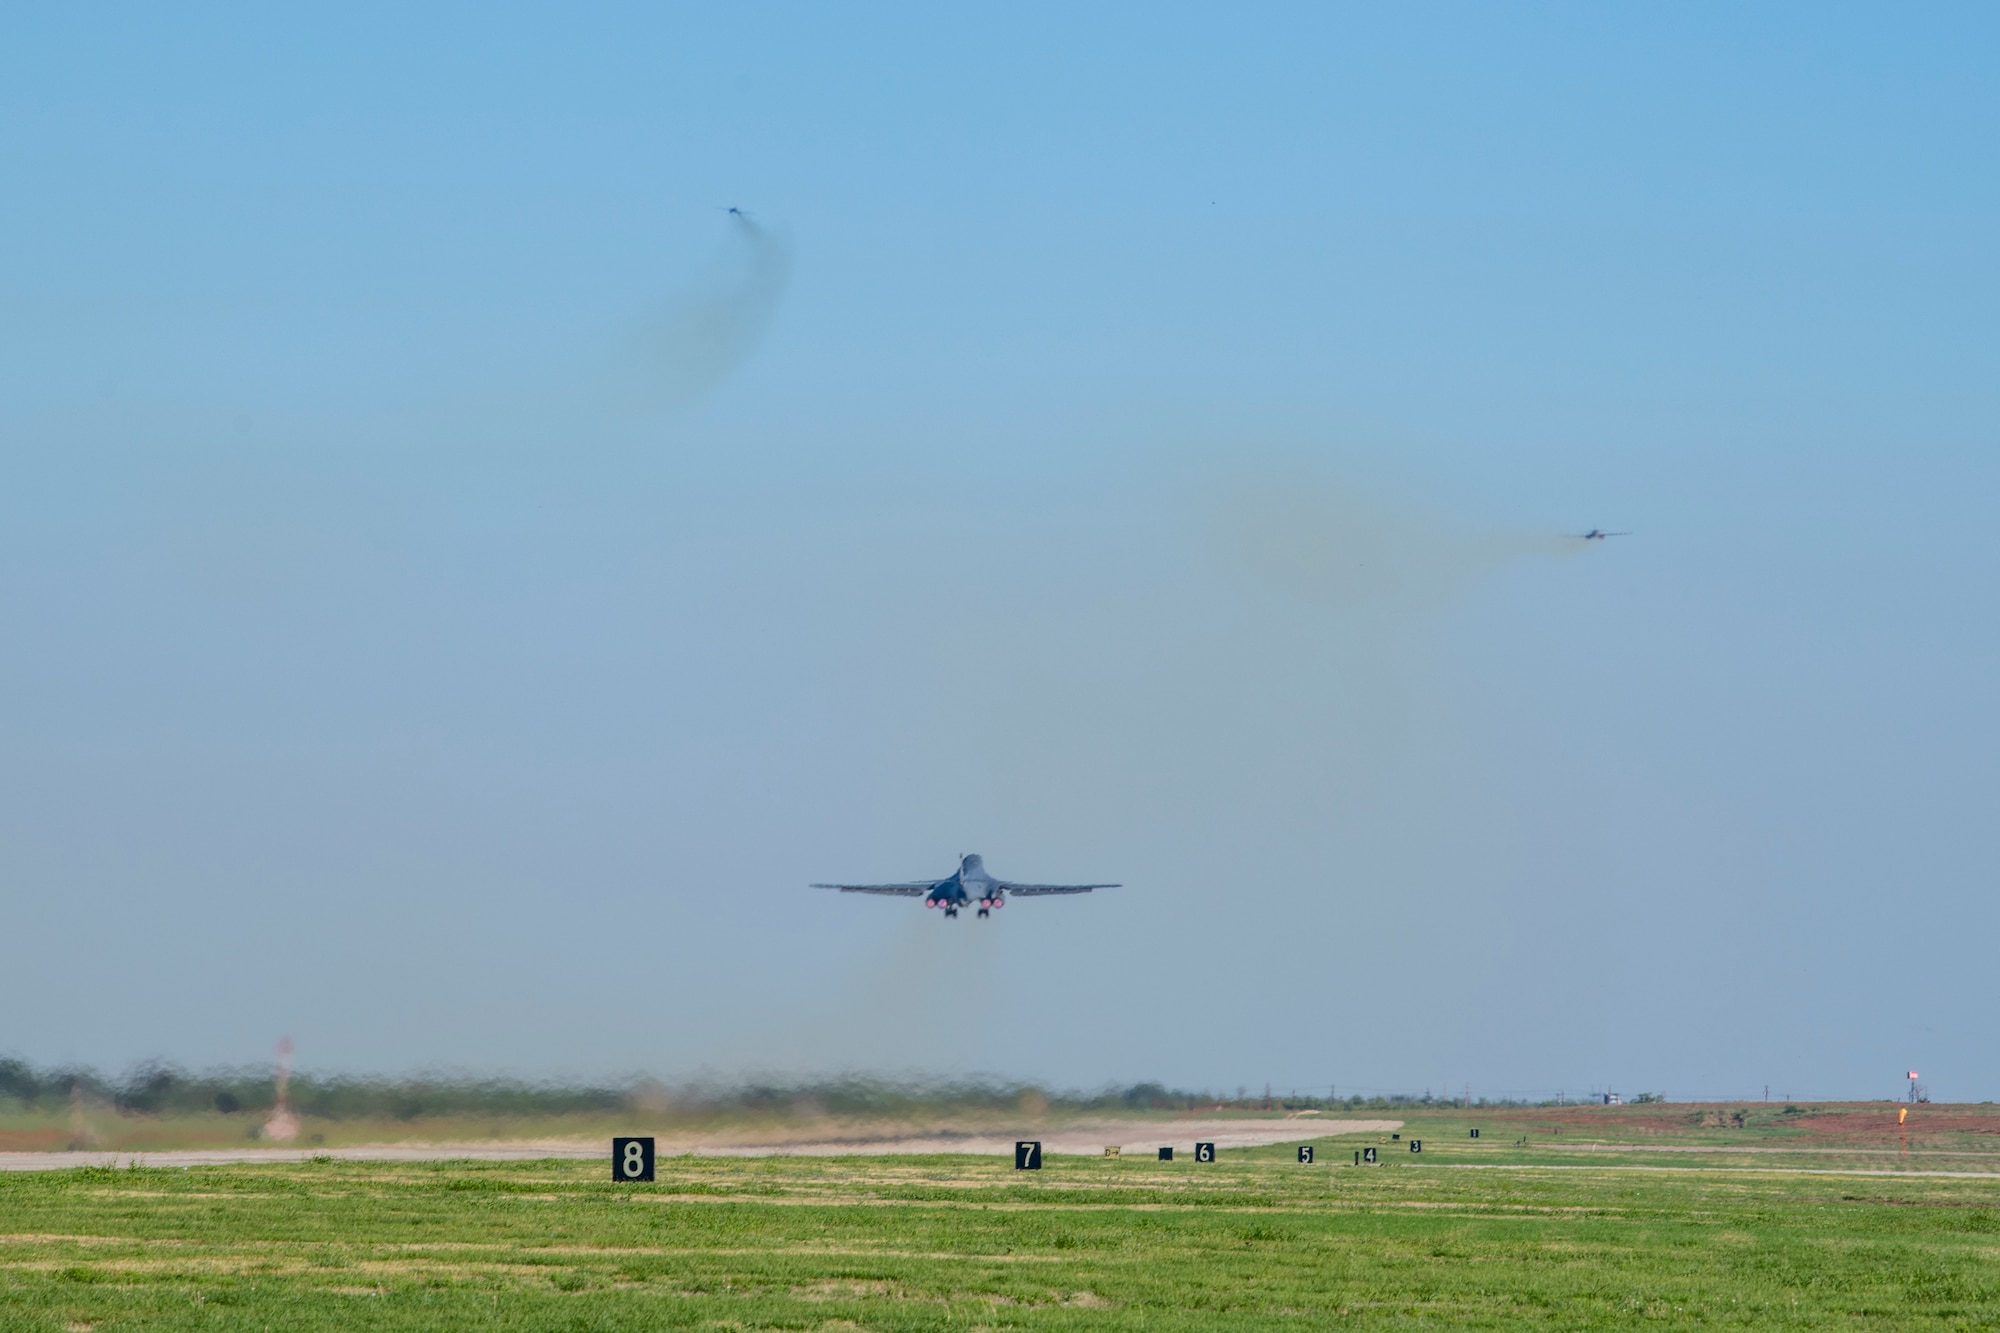 Three B-1B Lancers takeoff from Dyess Air Force Base, Texas Sept. 7th, 2022 for a Bomber Task Force mission to U.S. Southern Command. BTF missions familiarize aircrews with air bases and operations in different Geographic Combatant Commands and enable them to maintain a high state of readiness and proficiency, validating the U.S. Air Force Global Strike Command’s always-ready global strike capability. (U.S. Air Force photo by Senior Airman Mercedes Porter)